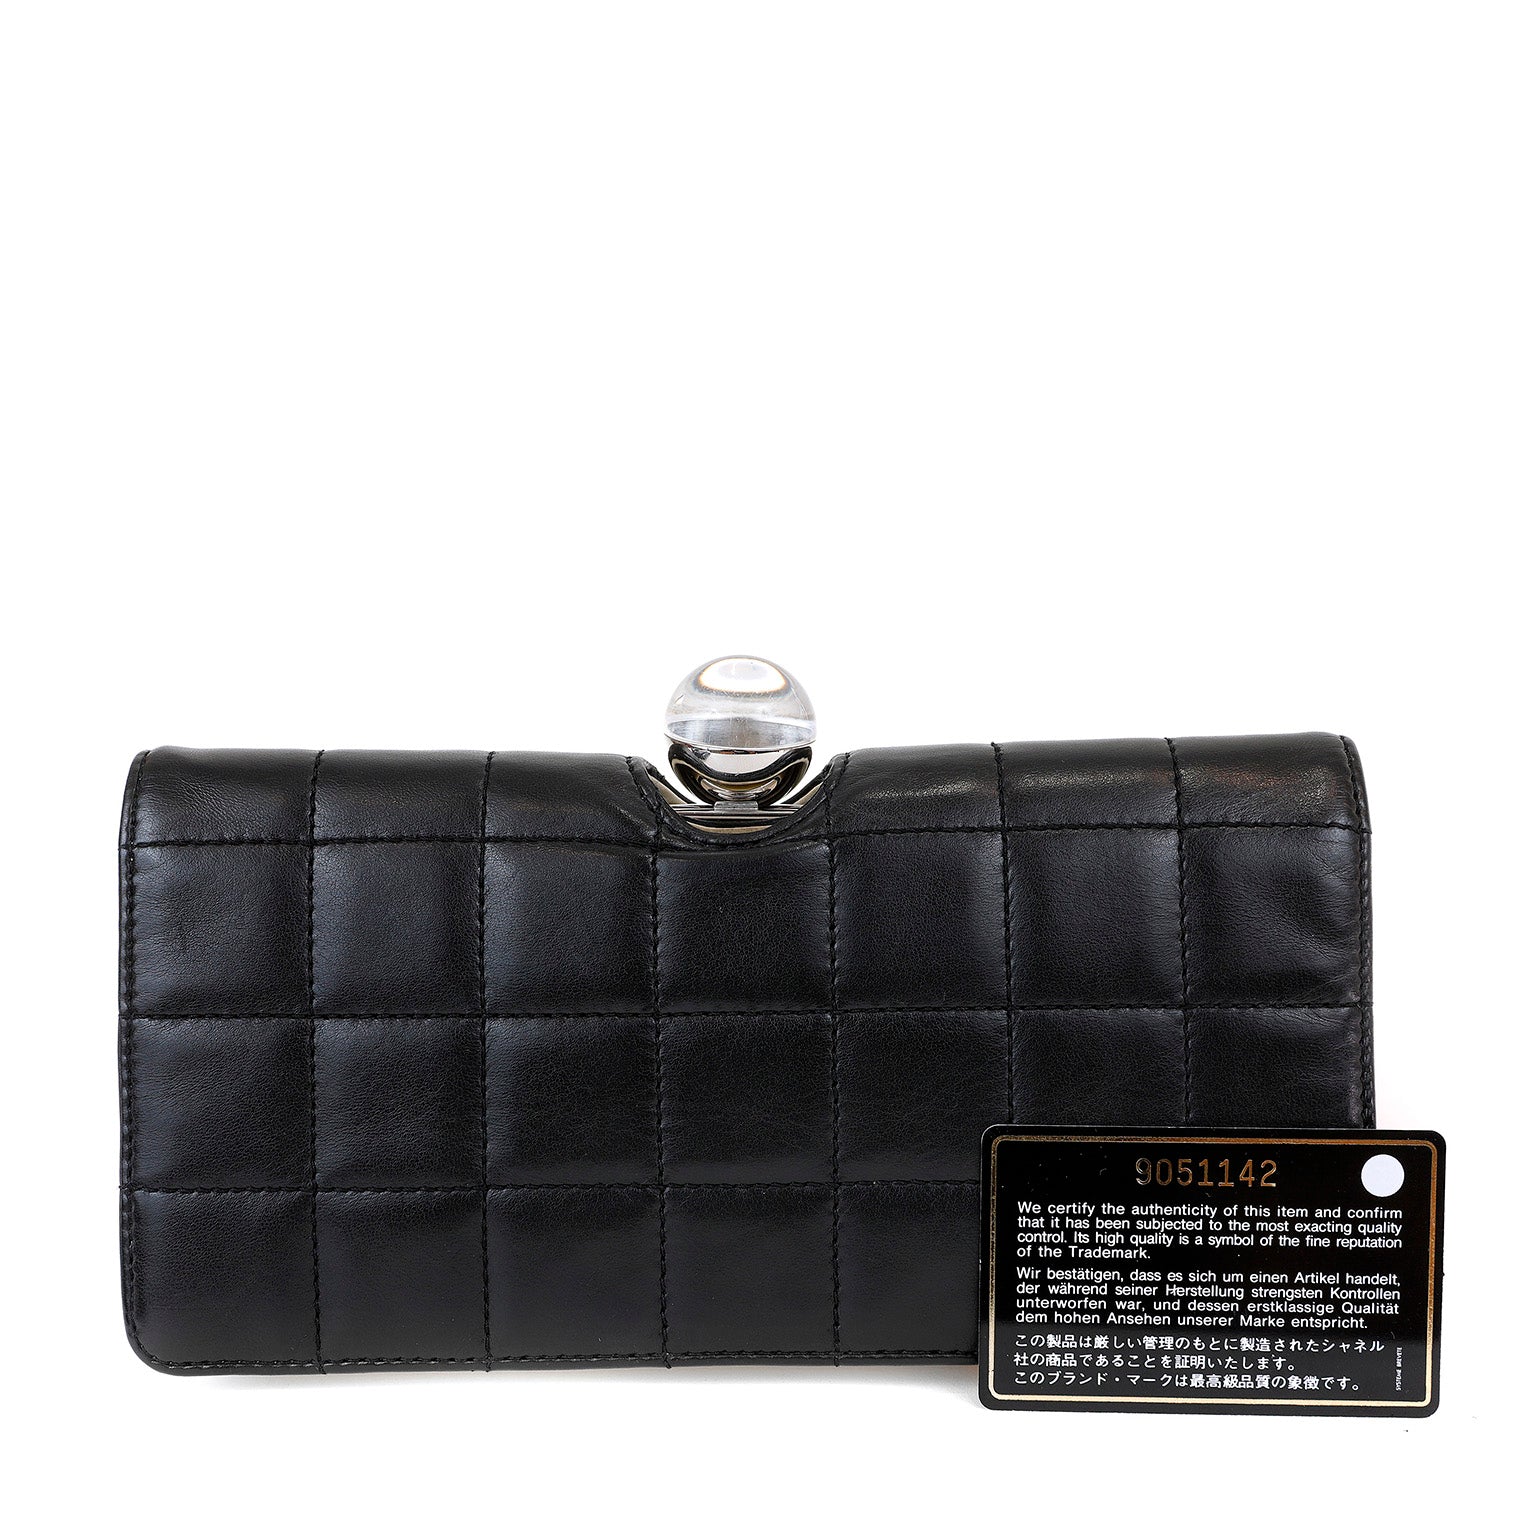 This Chanel clutch is a true statement piece, blending classic black and  white lambskin leather with a chic square-stitching pattern – Only  Authentics